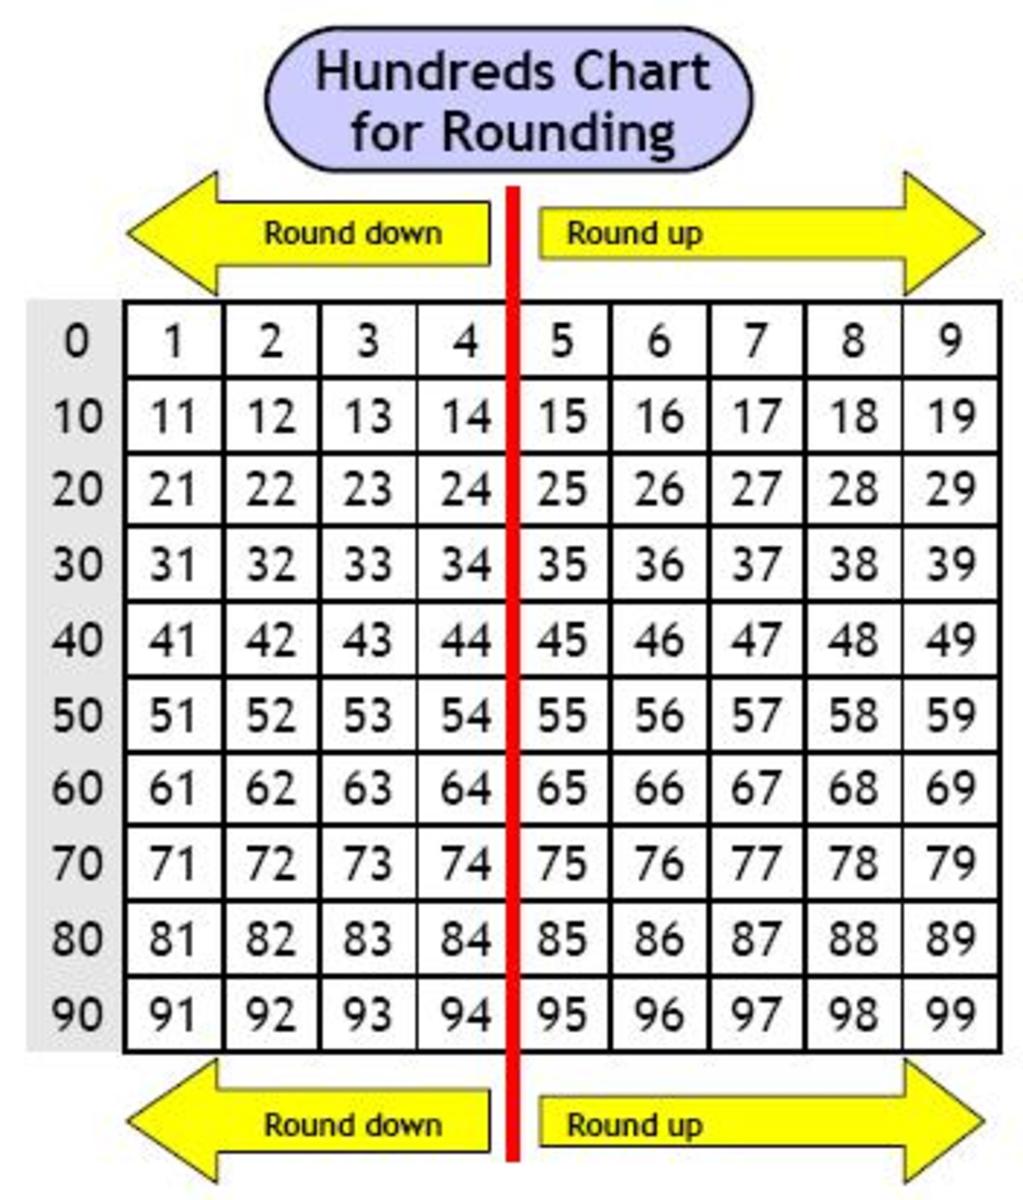 rounding-to-decimal-places-norledgemaths-decimal-places-teaching